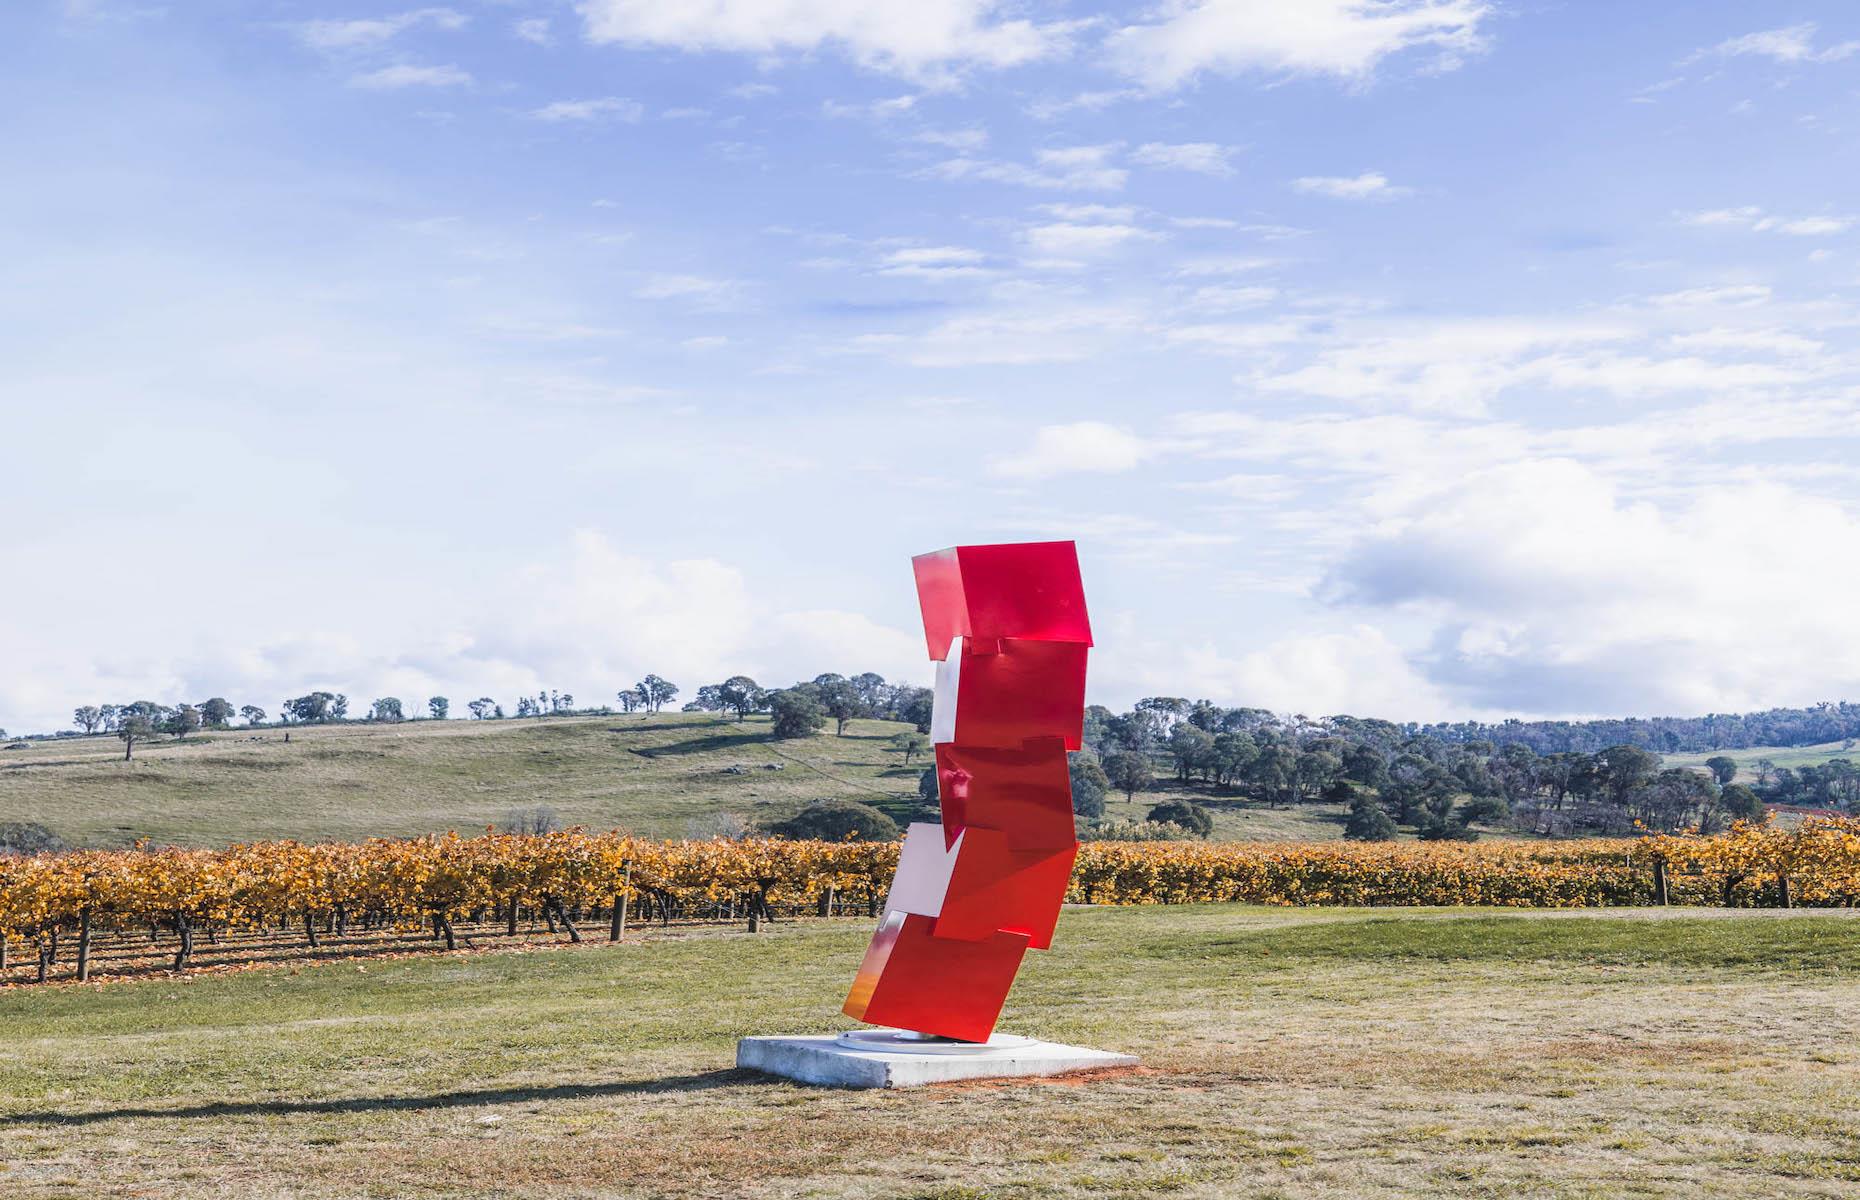 <p>The <a href="https://sculpturebythesea.com/snowyvalleys/">Snowy Valleys Sculpture Trail</a> joined the Sculpture by the Sea family in 2022, a permanent installation which stretches 62 miles (100km) through the townships of Adelong, Batlow, Tumbarumba and Tooma and vineyards in the Snowy Mountains. The region was badly affected by the 2019-20 bushfires and this initiative was funded by the Bushfire Local Economic Recovery Fund to help restore tourism and revive the community. The trail features 28 sculptures by Australian and international artists, and is set to expand to over 35 sculptures later in 2023.</p>